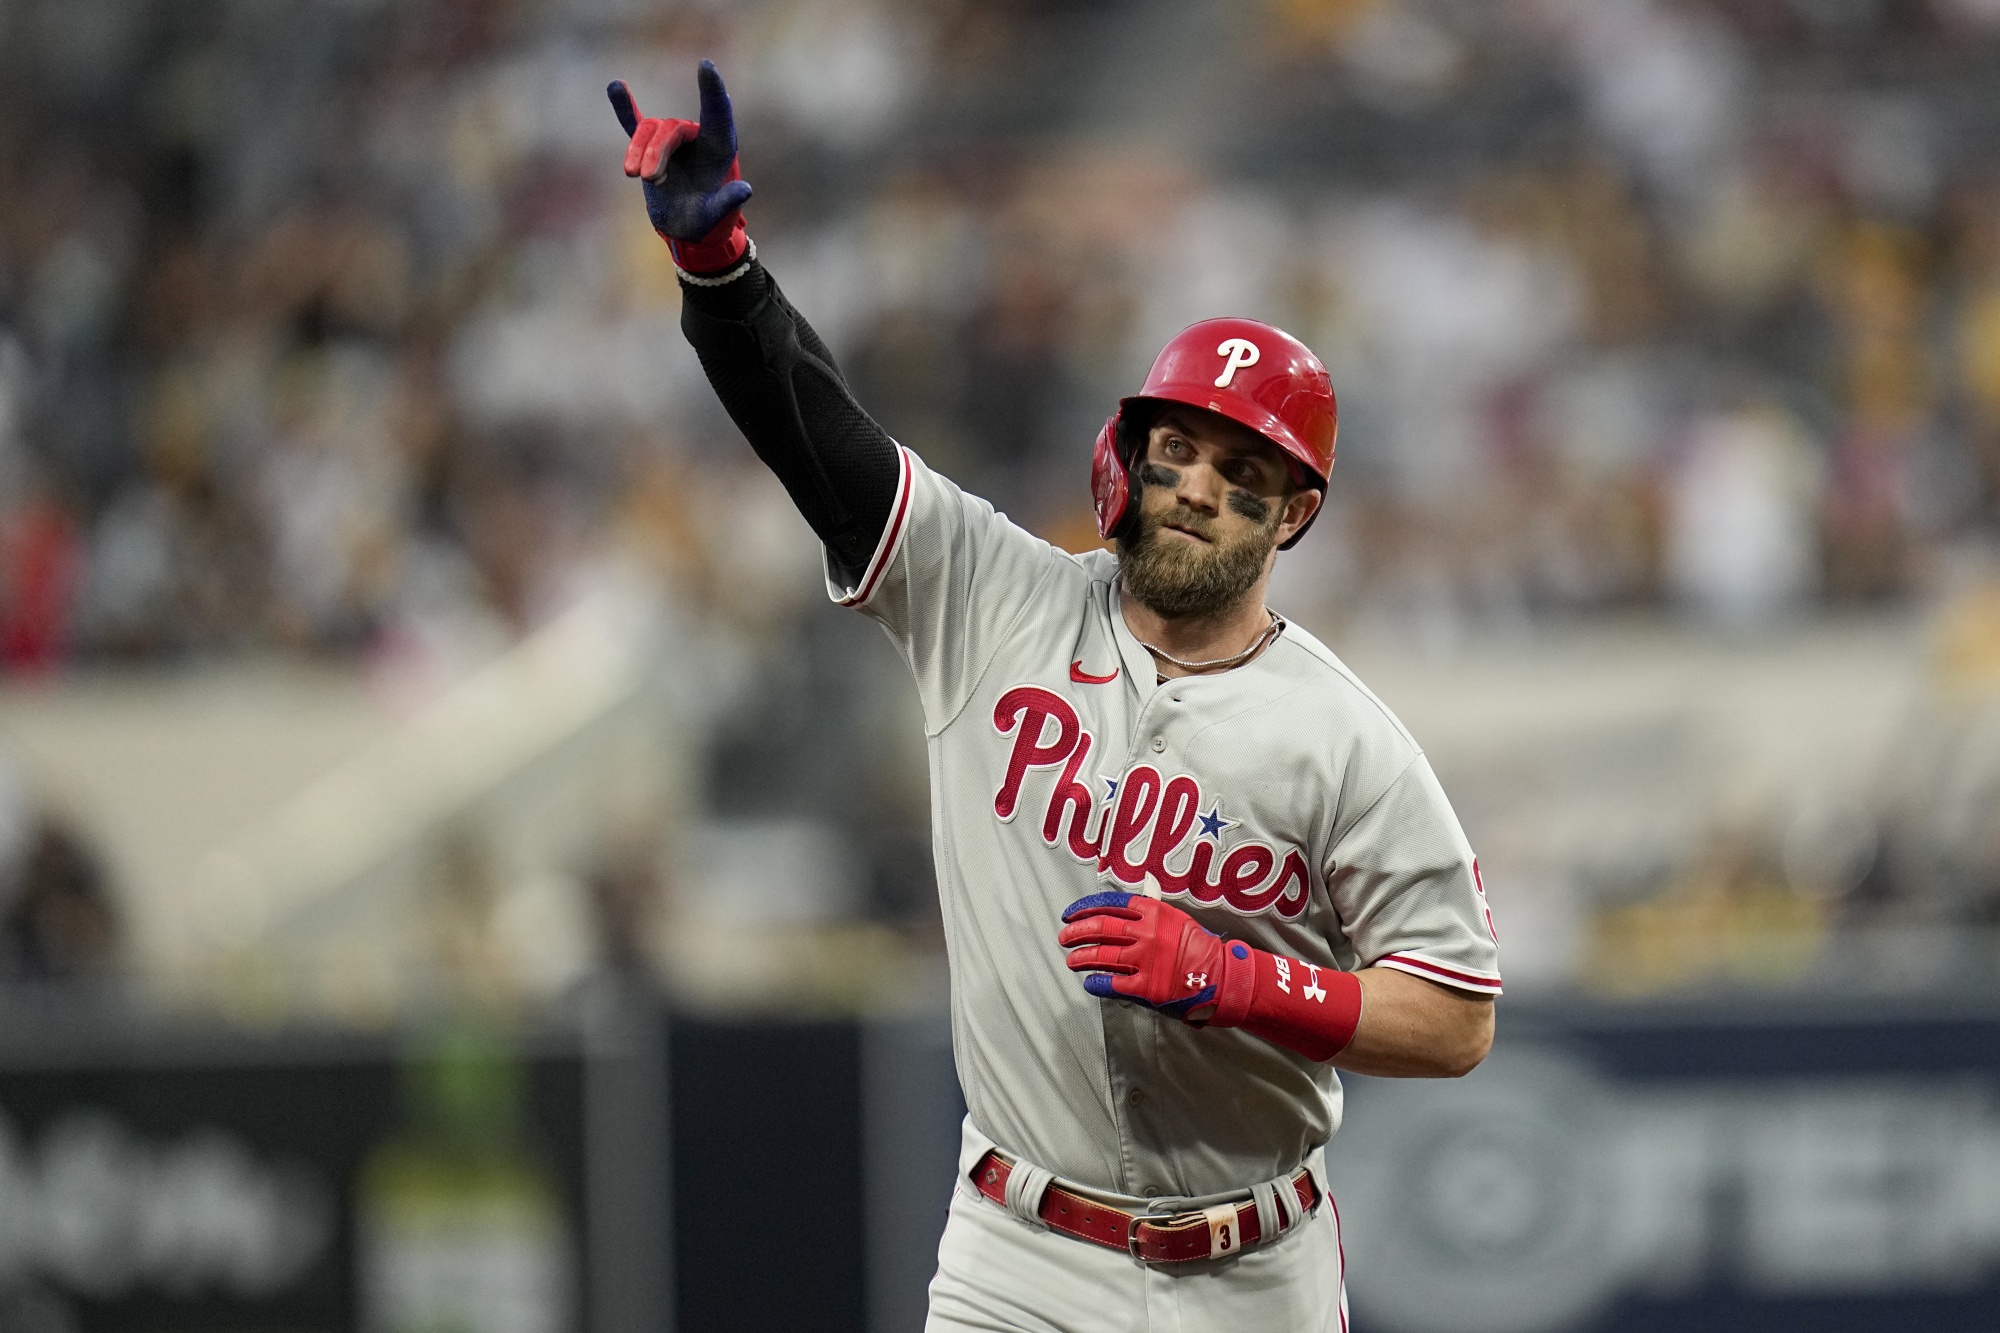 Bryce Harper's home run powers Phillies past Padres, into World Series